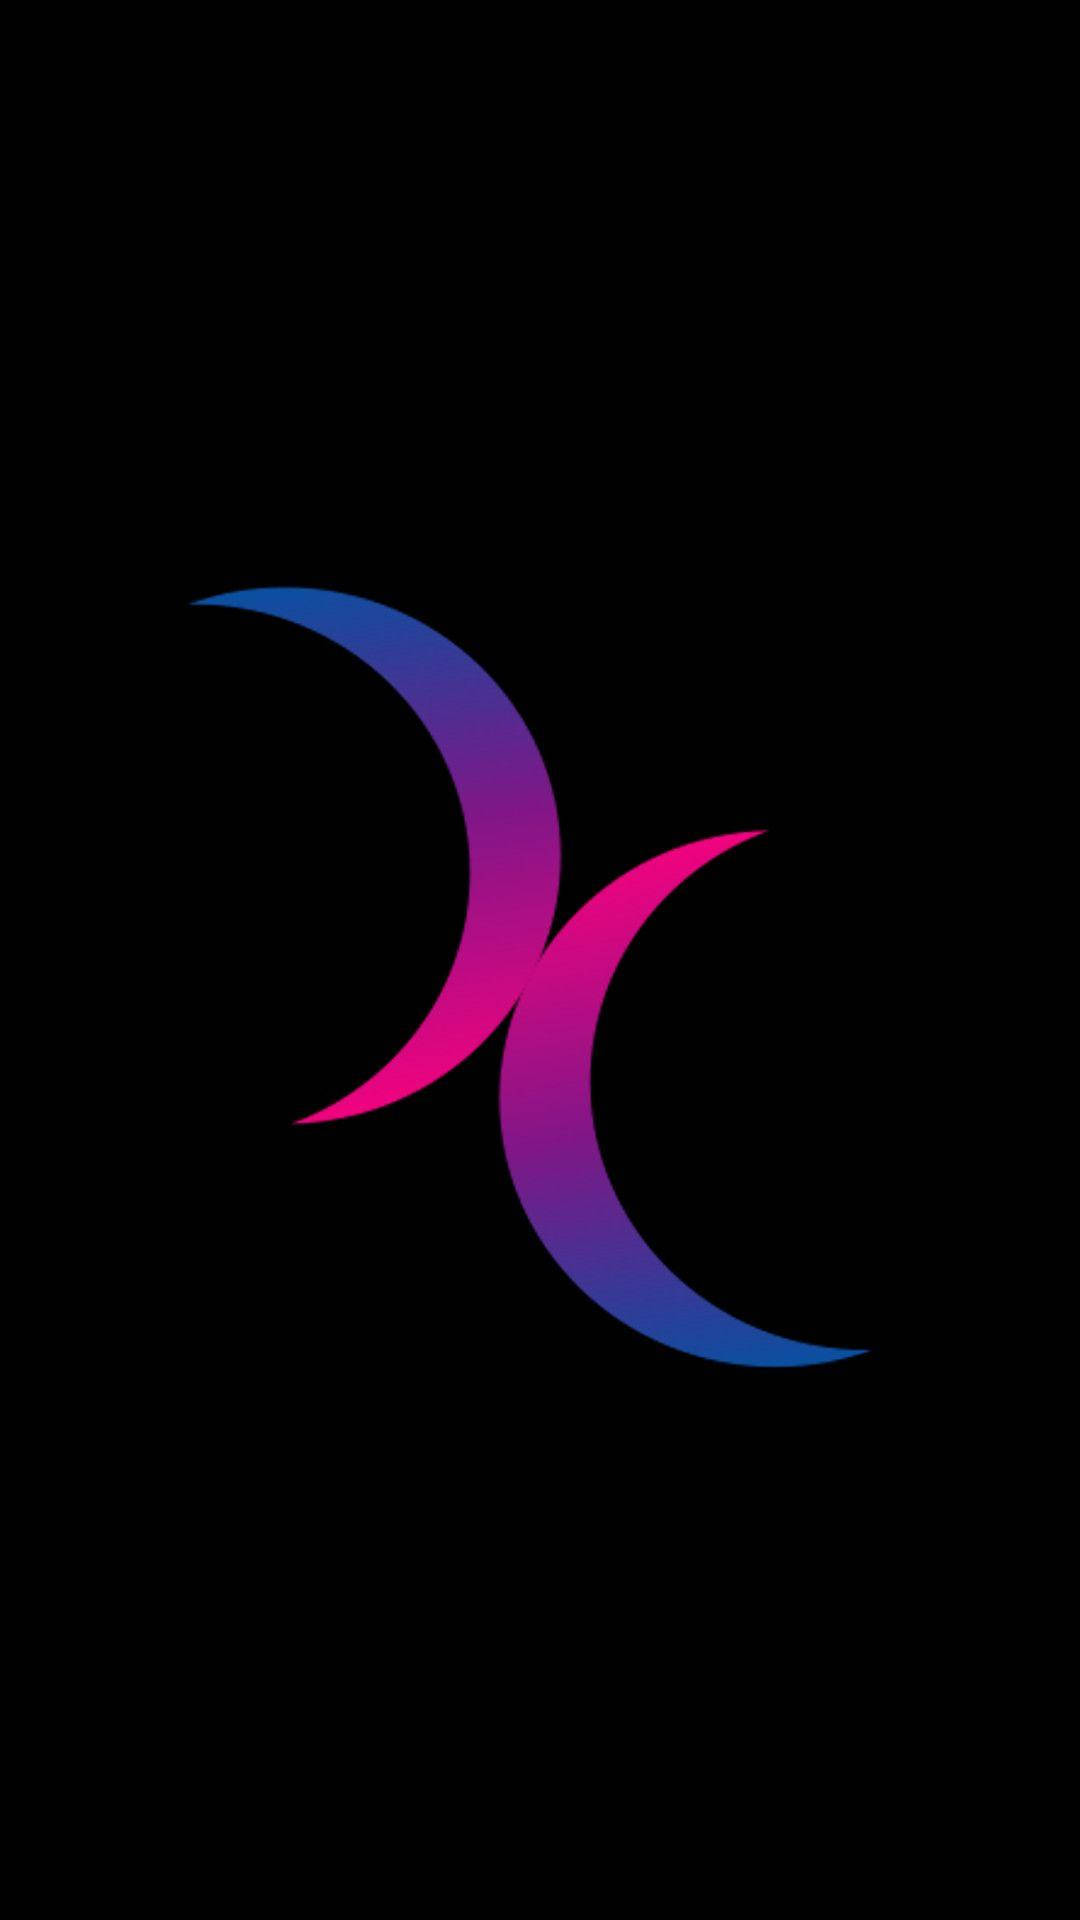 A purple and blue moon logo on black - Bisexual